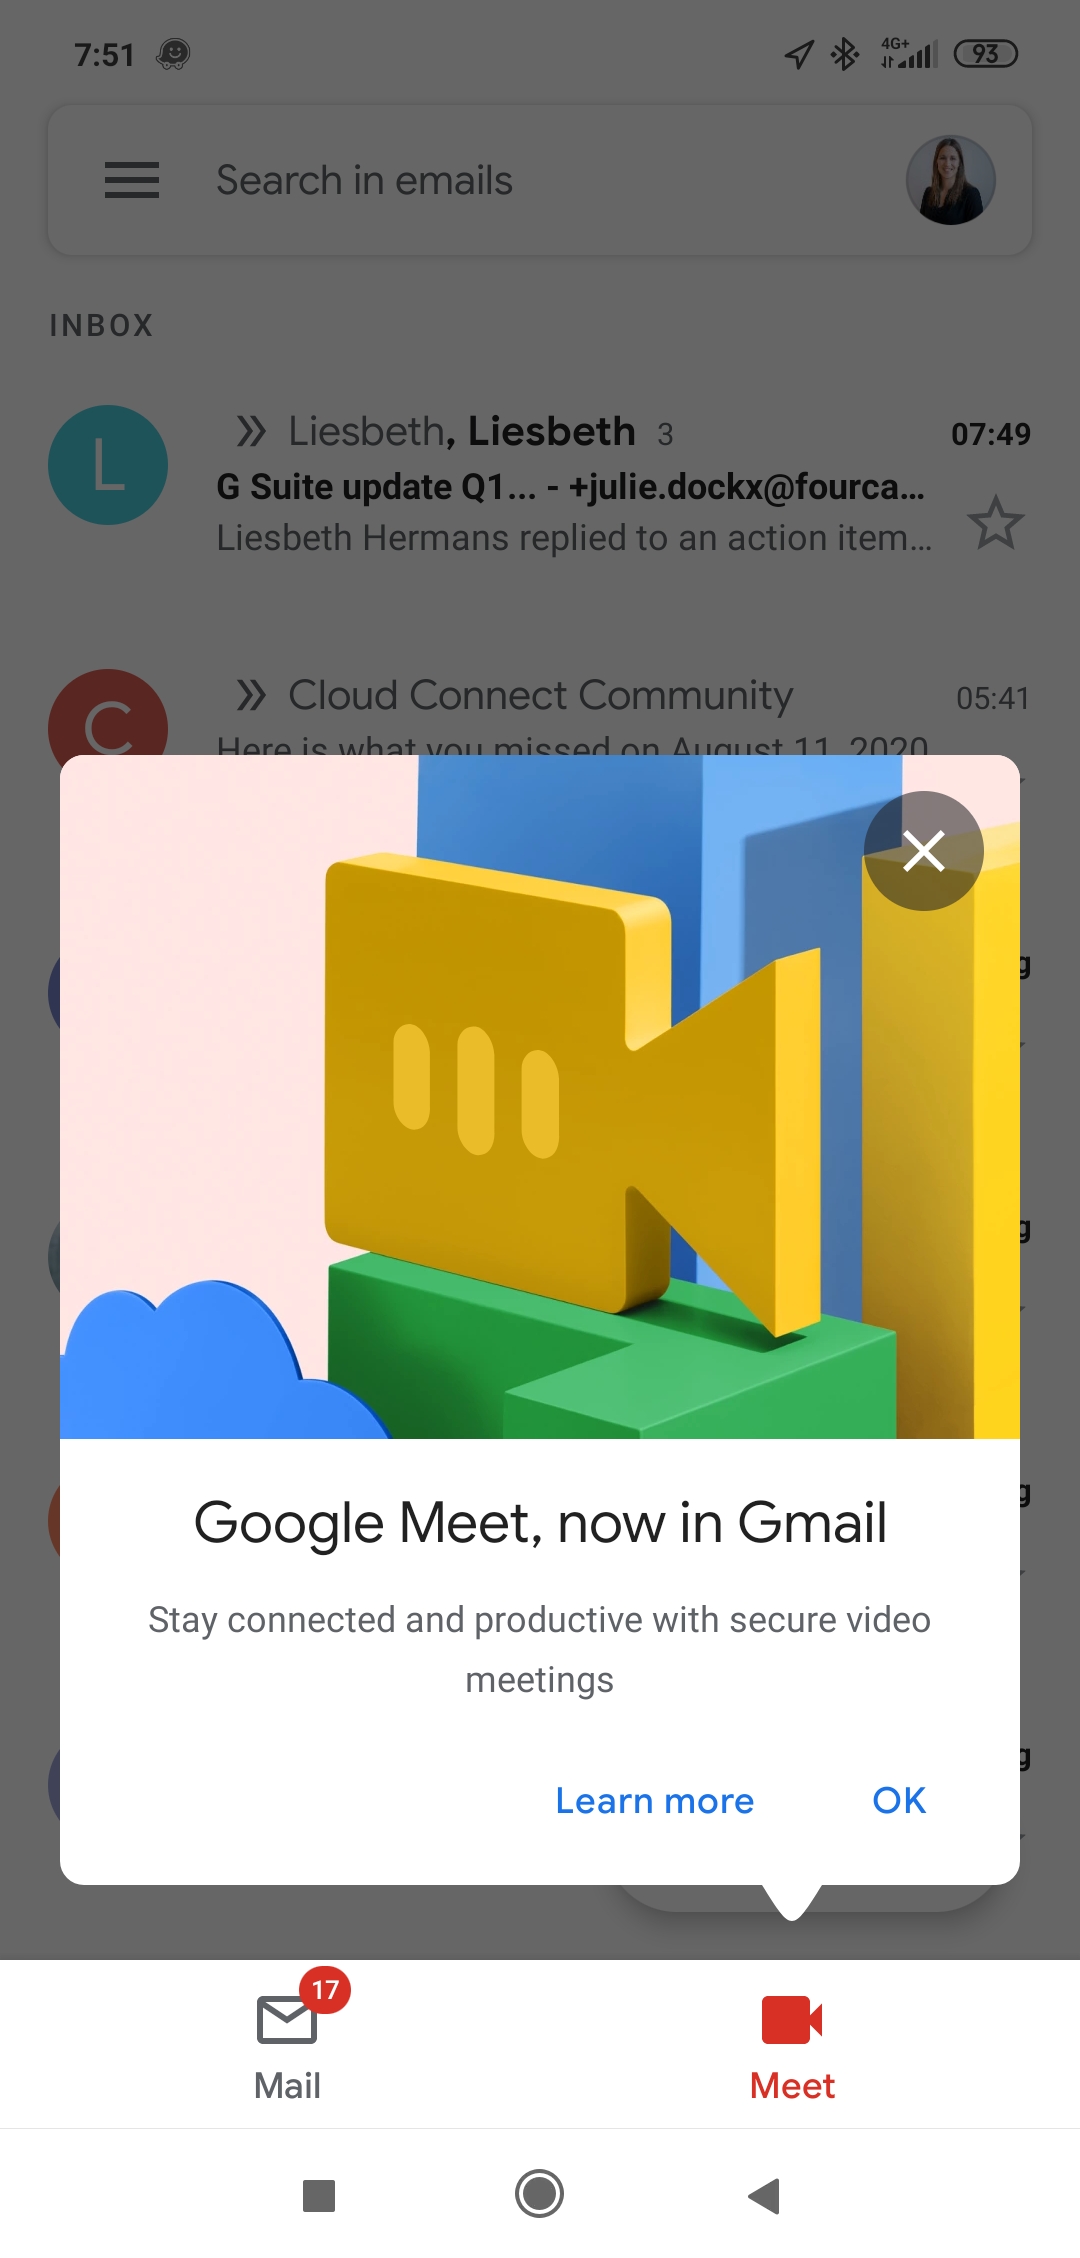 Mobile - Meet in Gmail